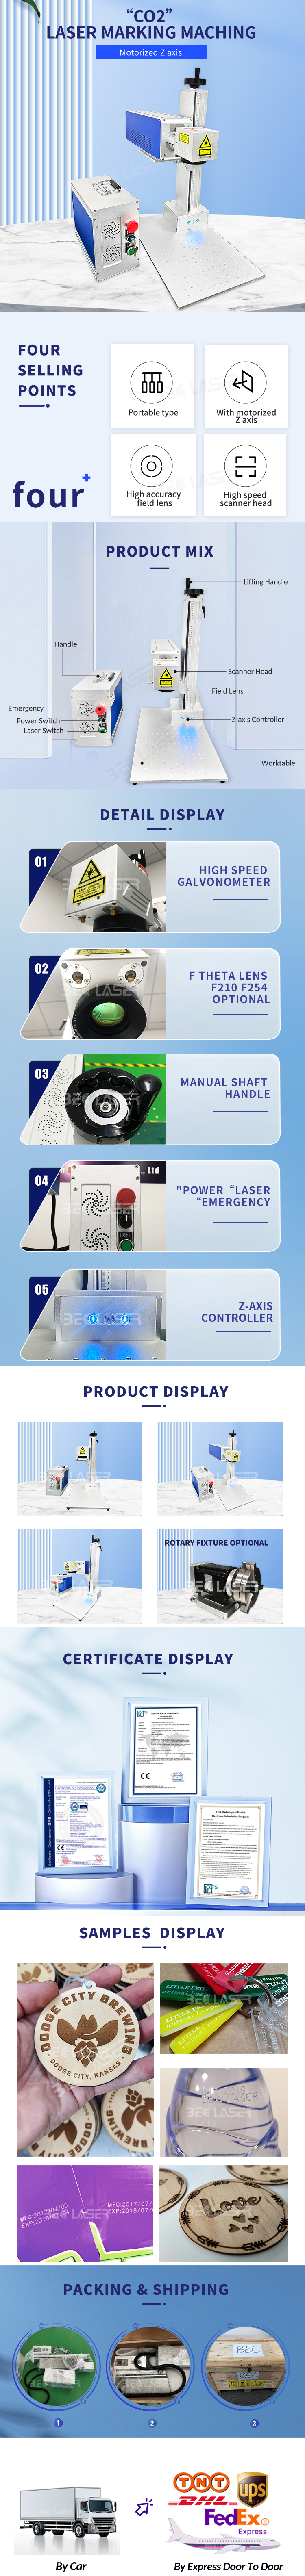 https://www.beclase.com/co2-laser-marking-machine-portable-type-product/